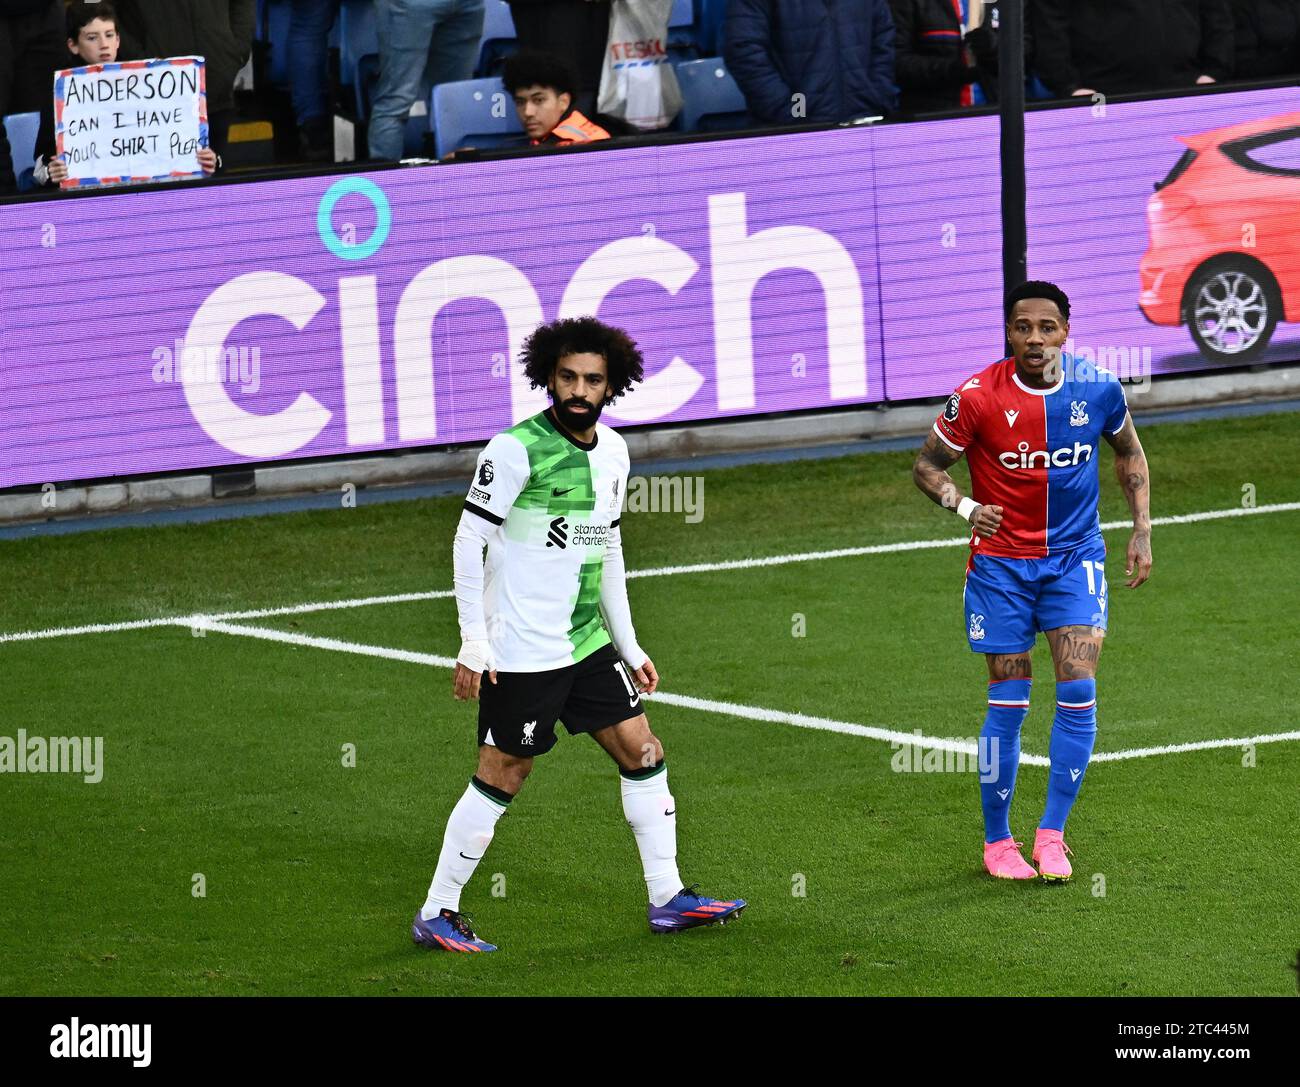 LONDON, ENGLAND - DECEMBER 9: Mohamed Salah, Nathaniel Clyne of Liverpool FC during the Premier League match between Crystal Palace and Liverpool FC a Stock Photo